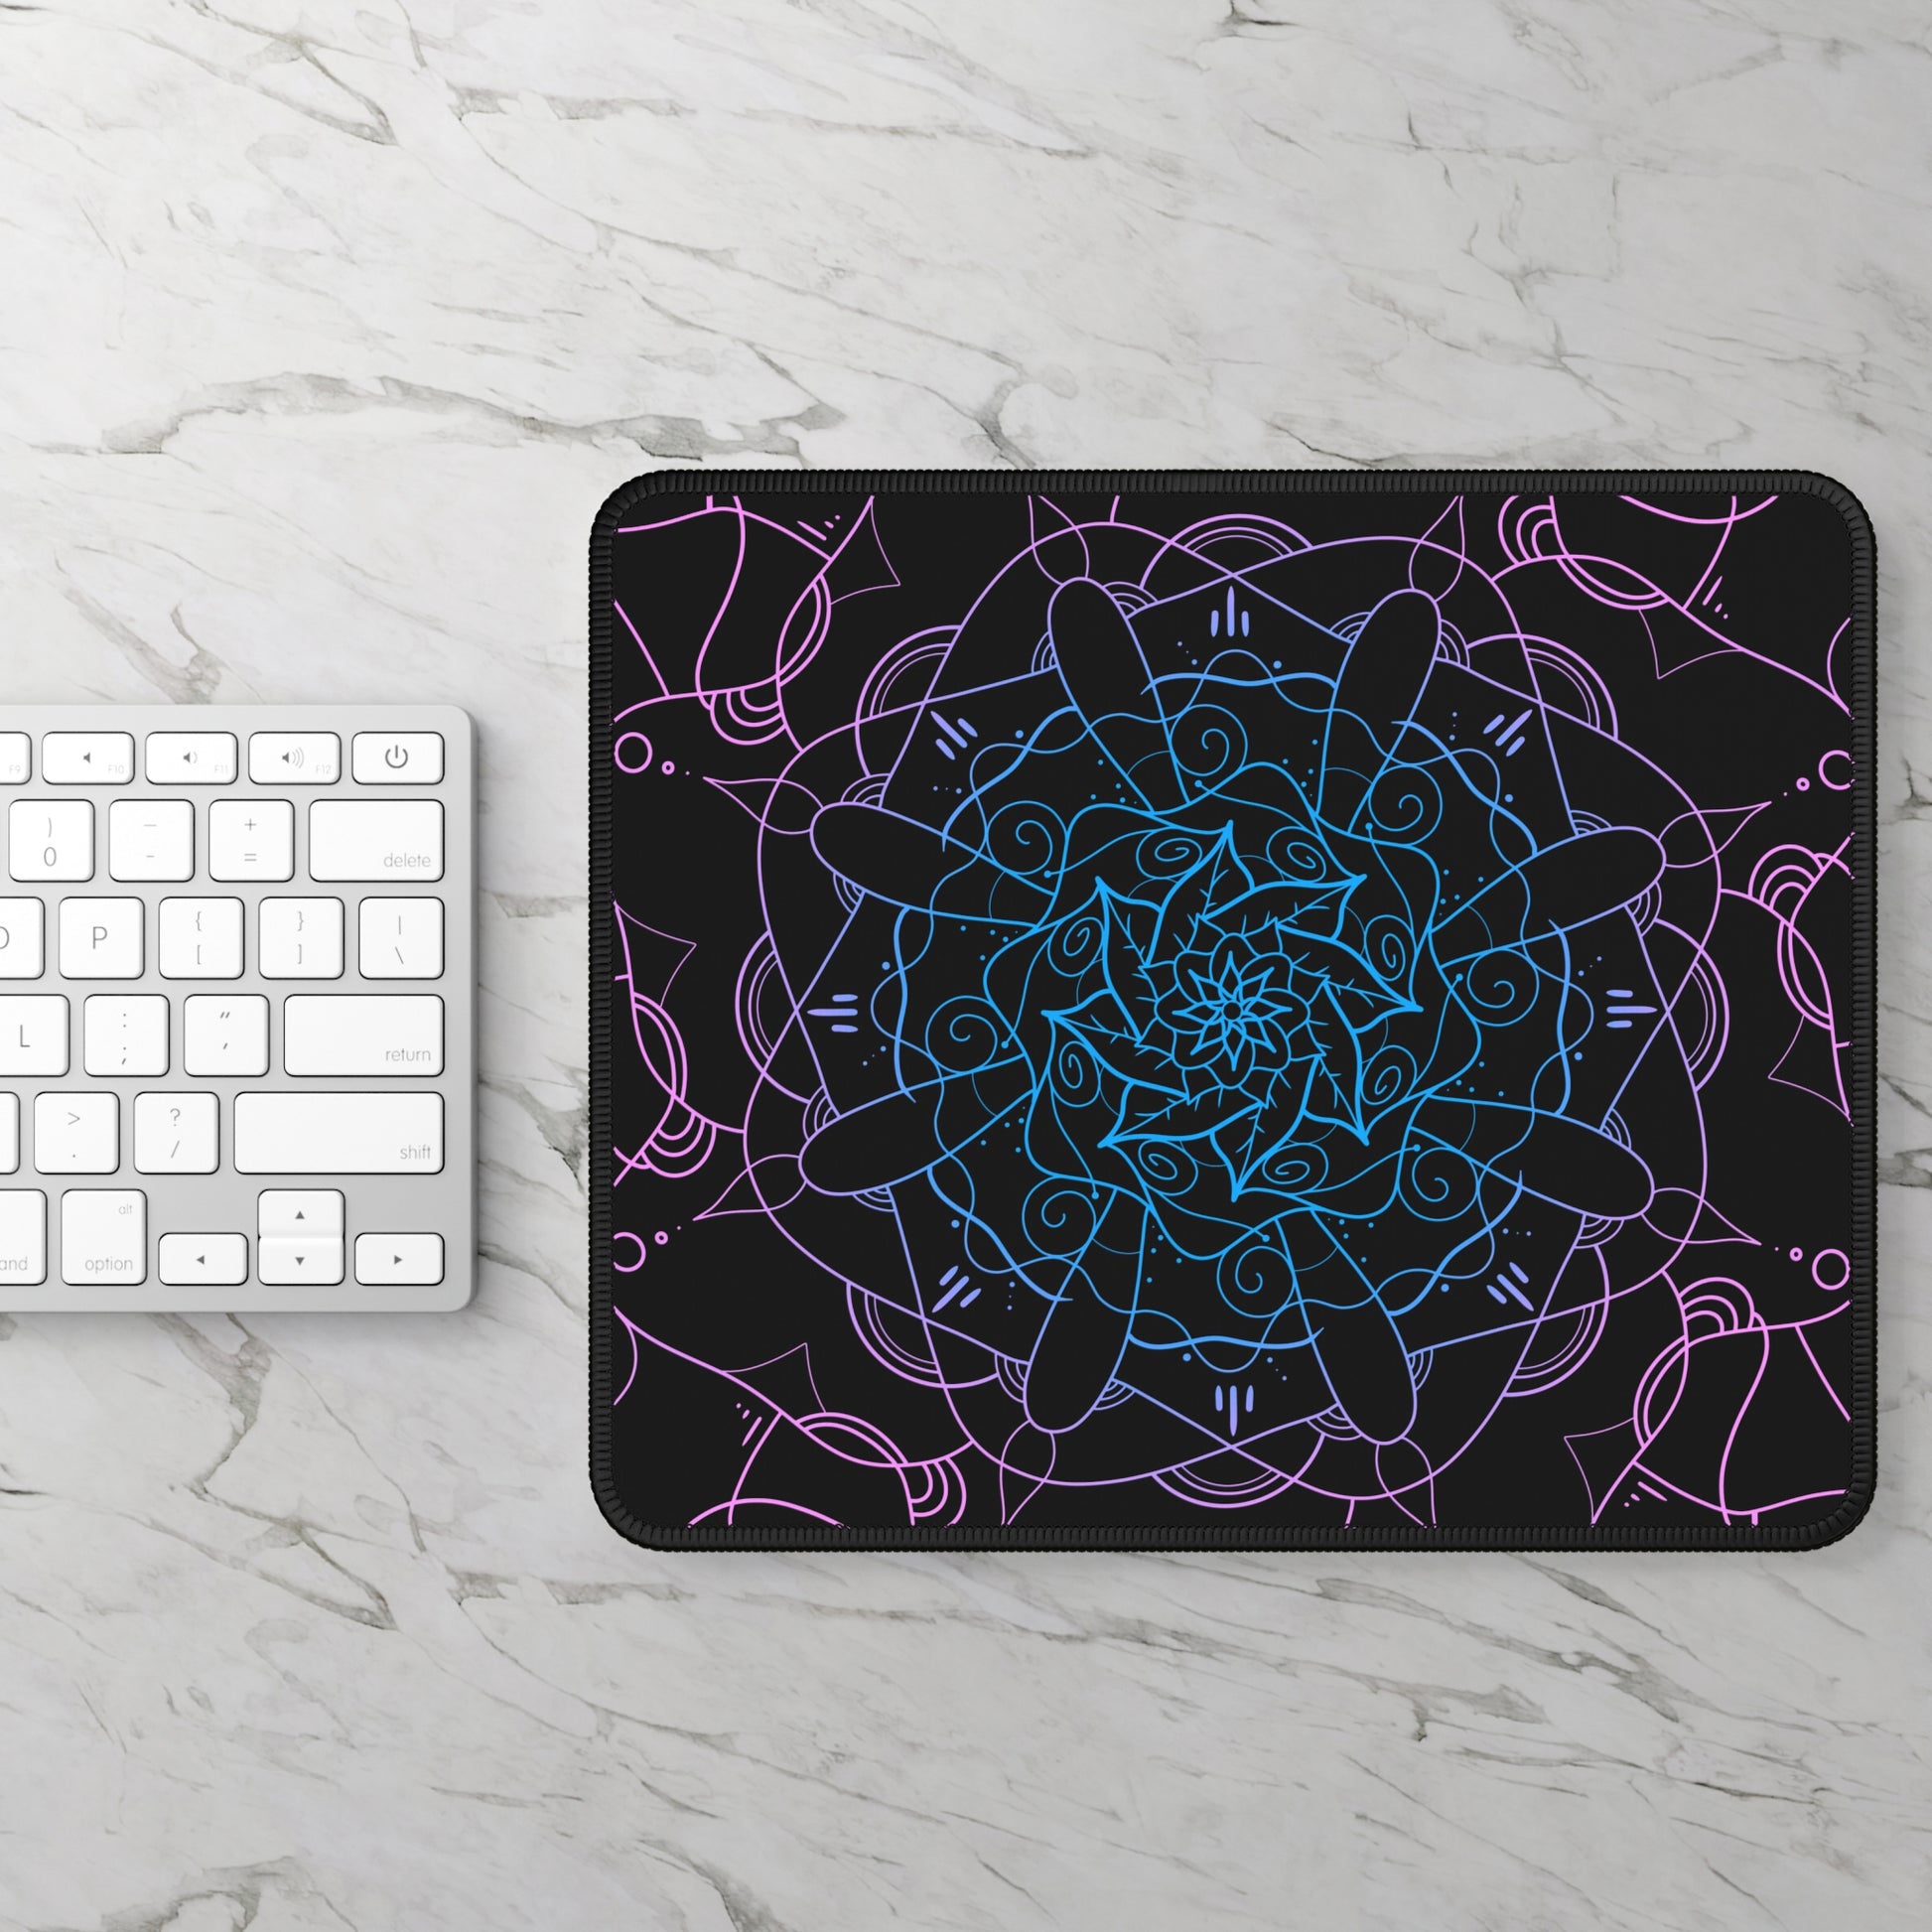 A gaming mouse pad with a pink and blue mandala pattern on a black background sitting next to a keyboard.